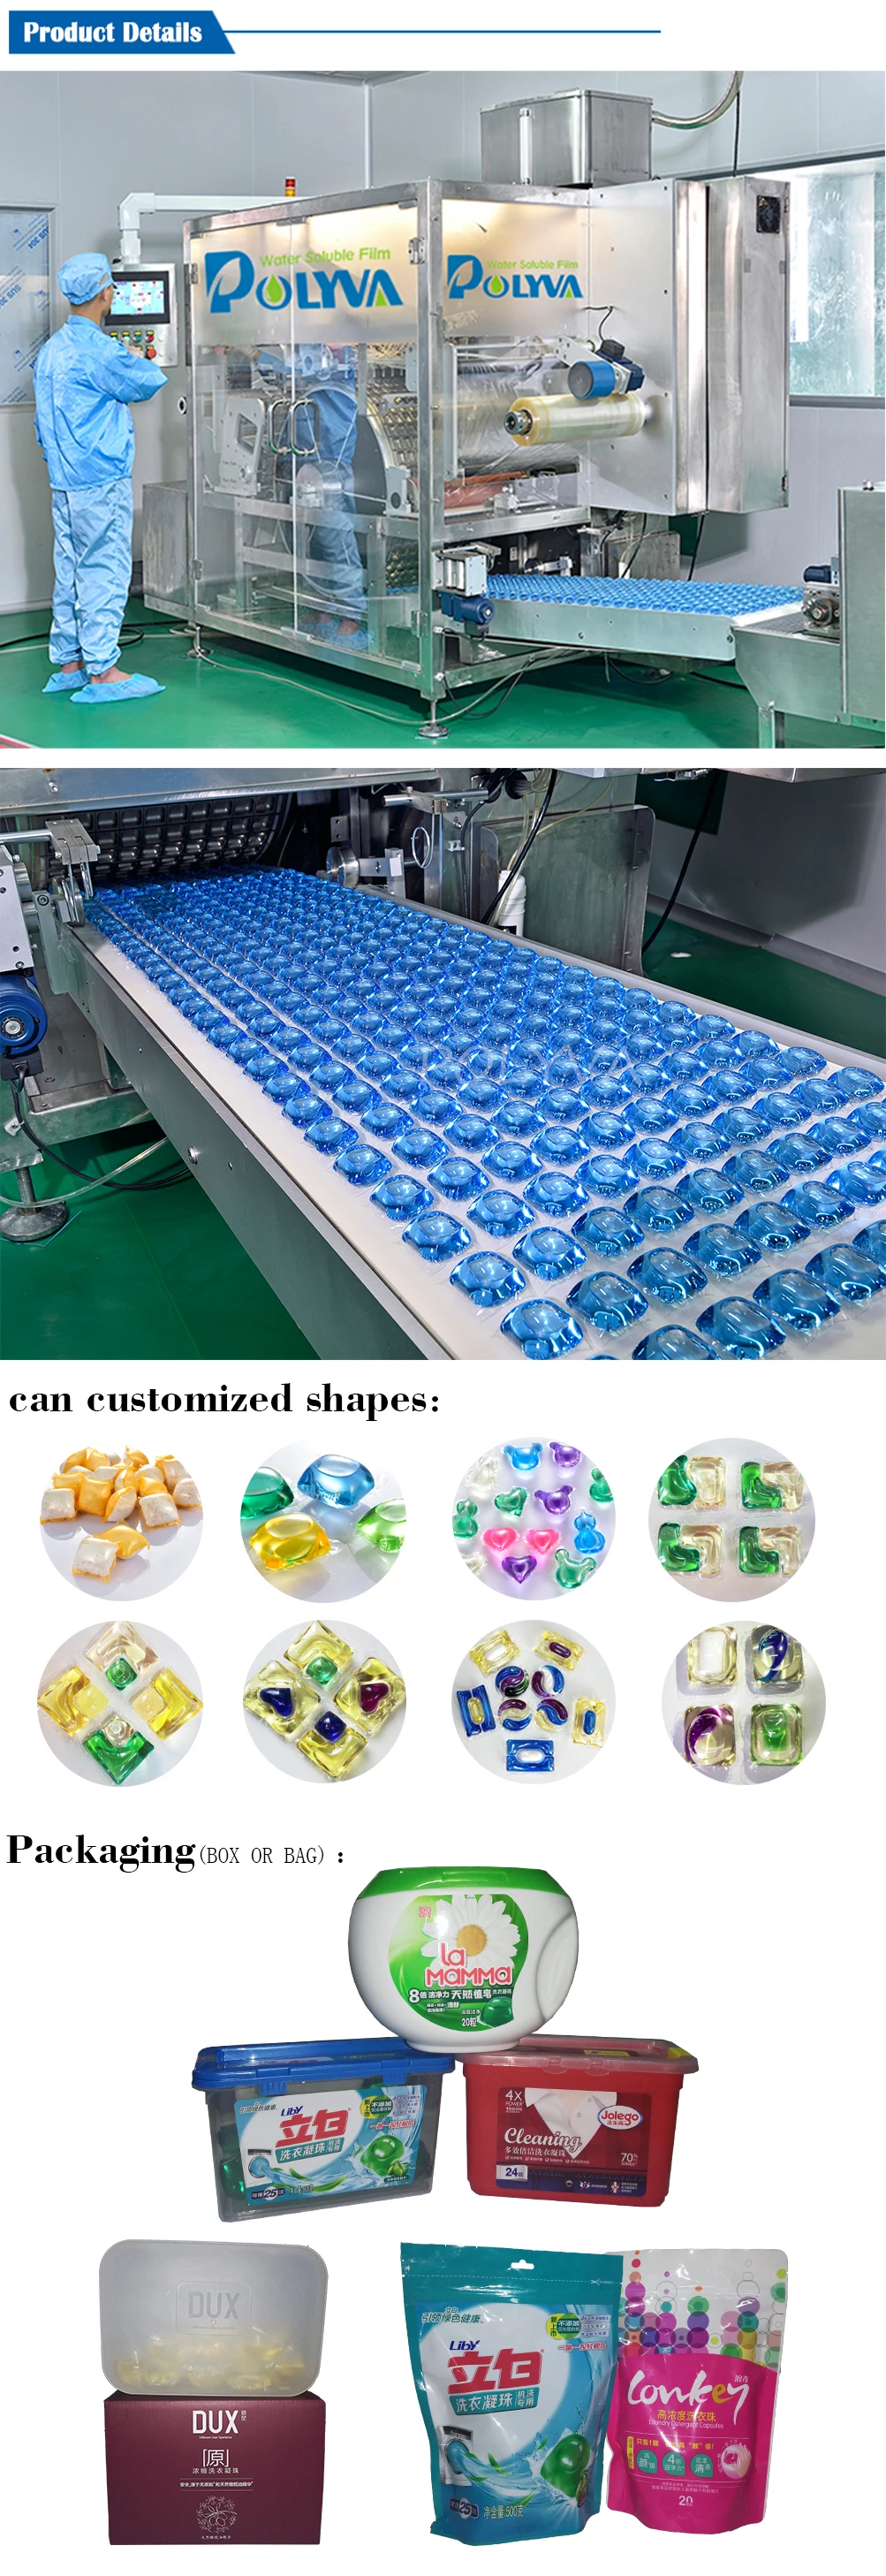 POLYVA portable Single Cavity Laundry Beads national standard for industrial chemicals